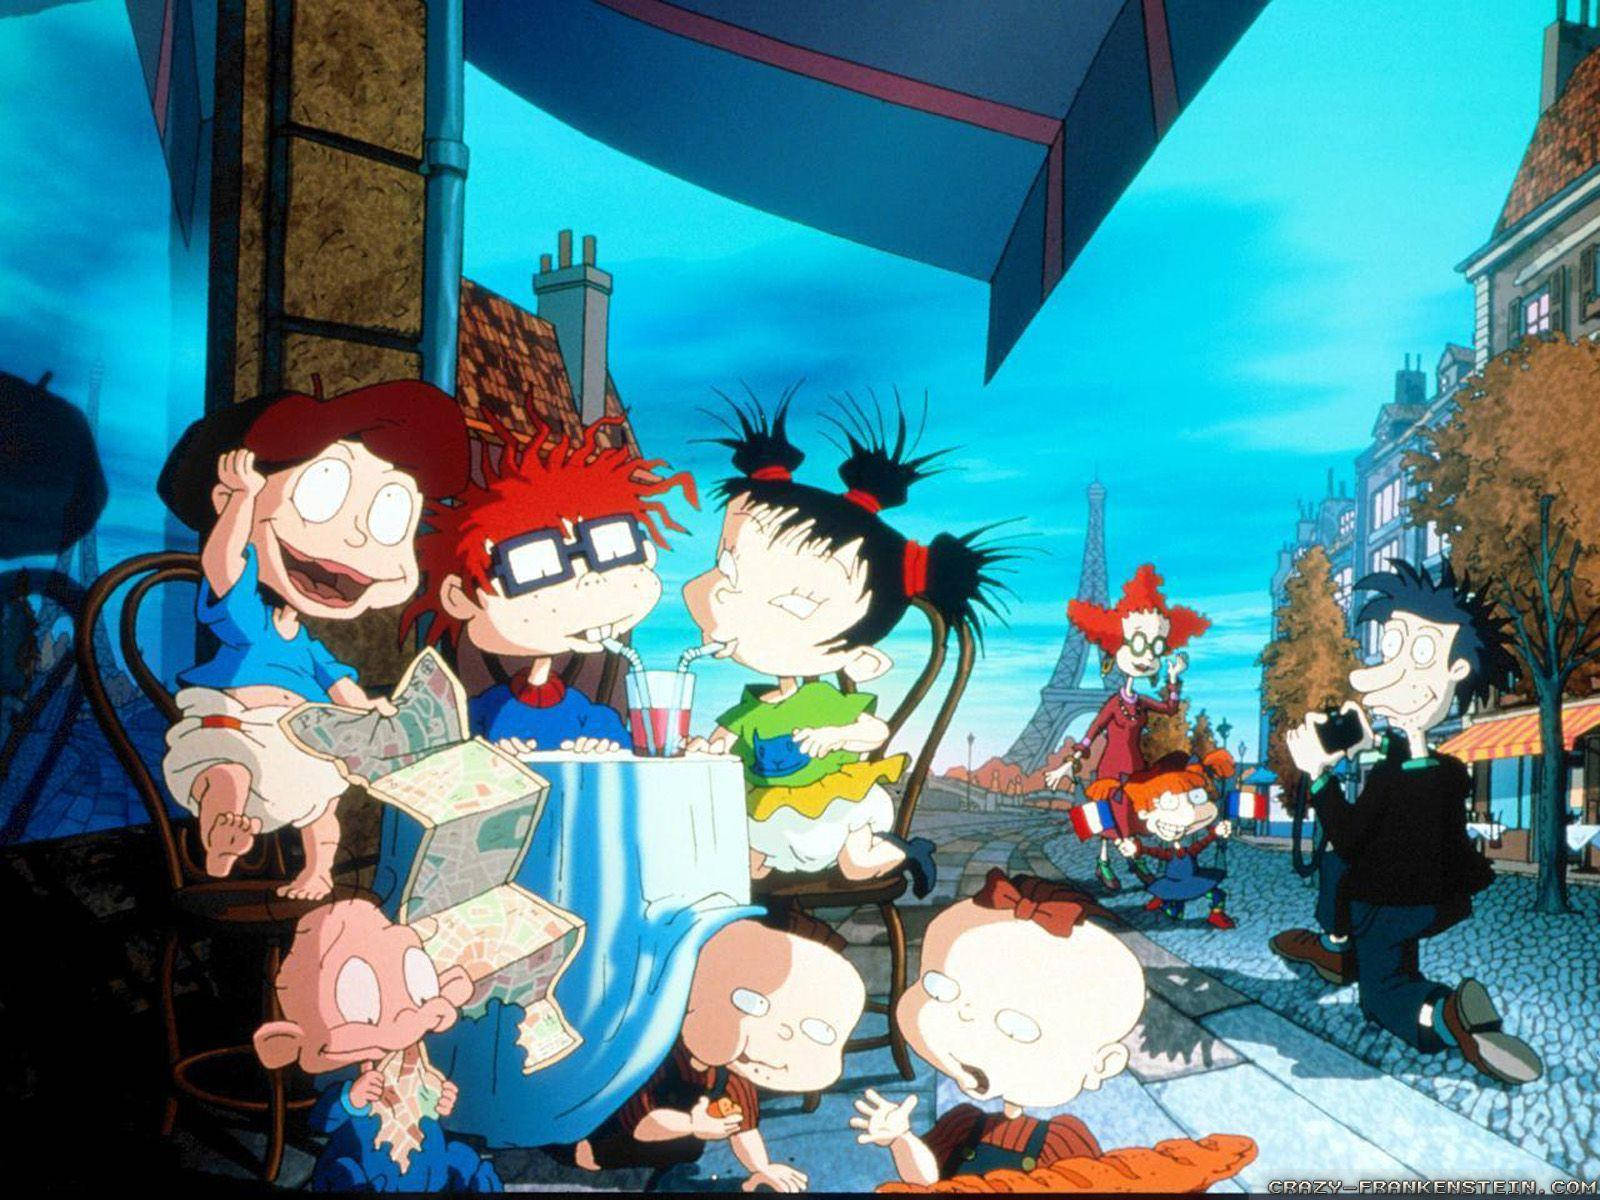 Life’s An Adventure For The Rugrats!